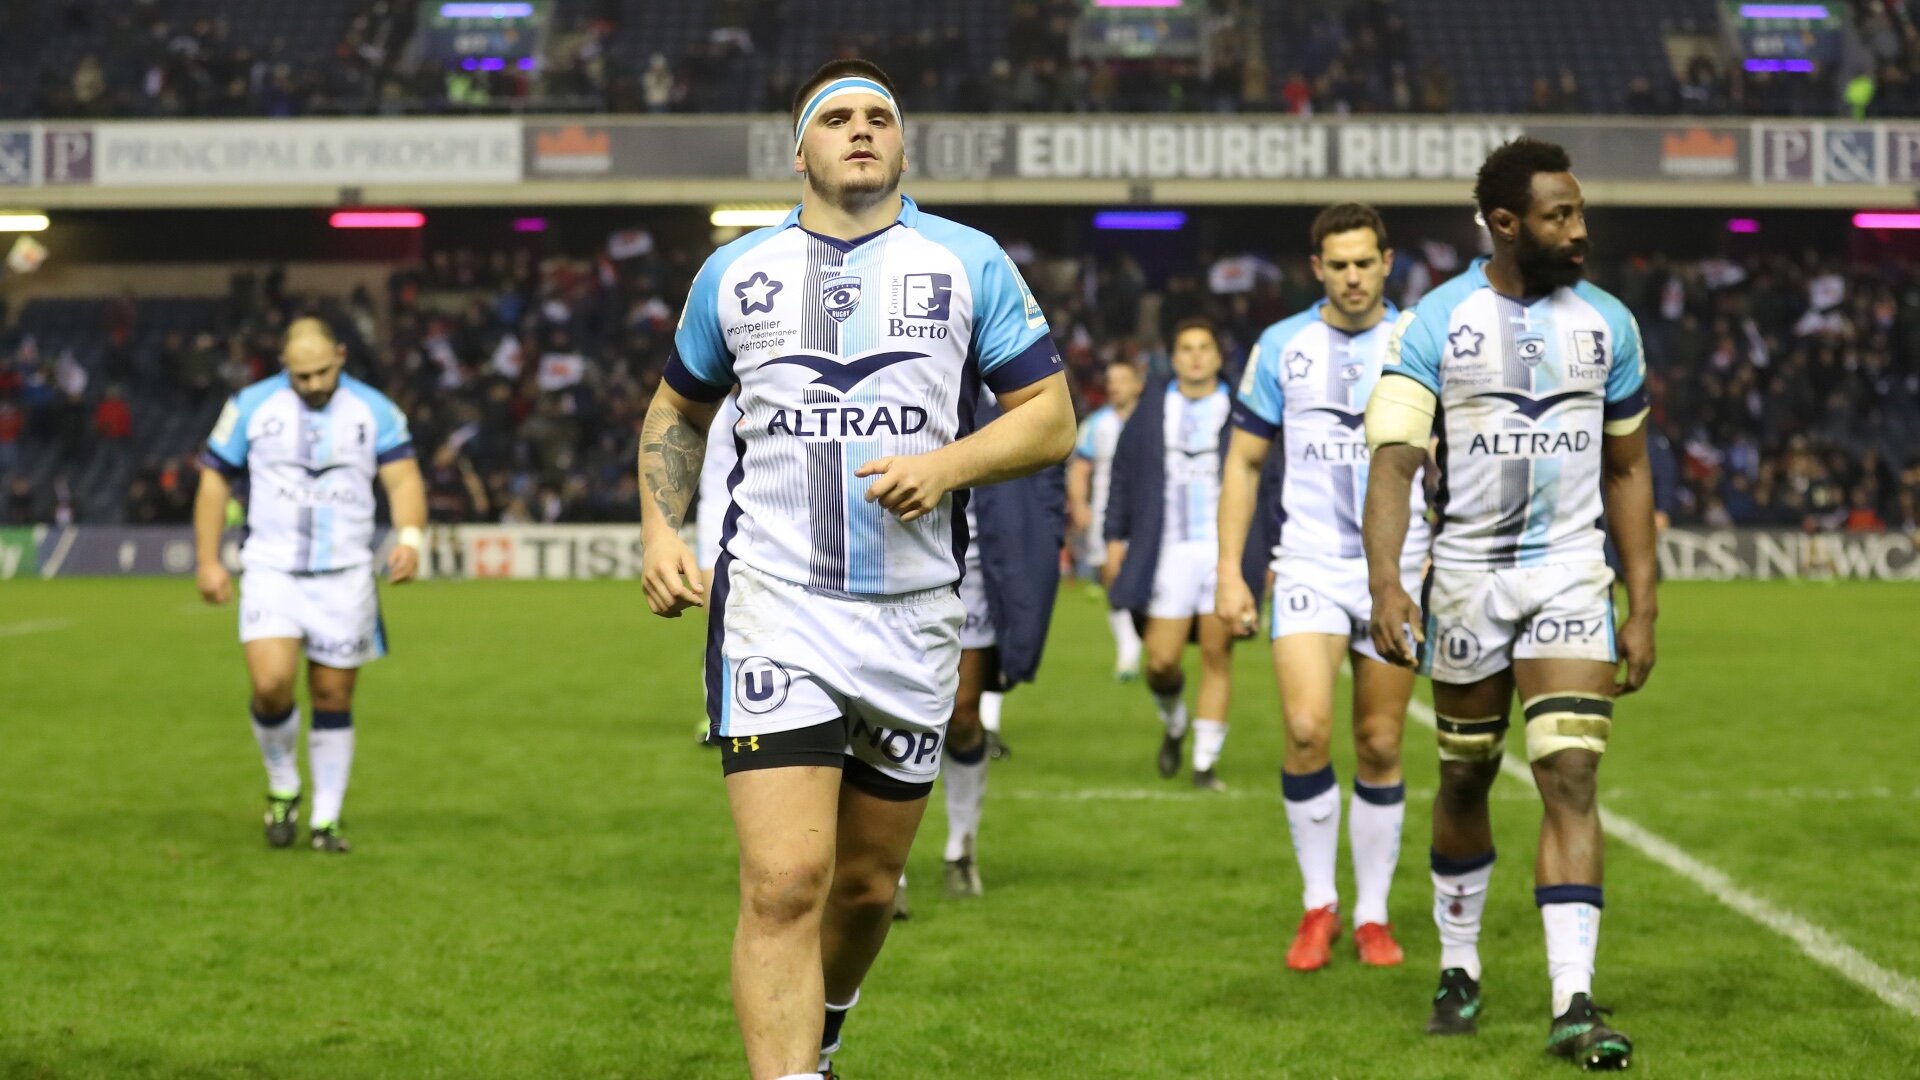 Montpellier successful in appealing salary cap punishment